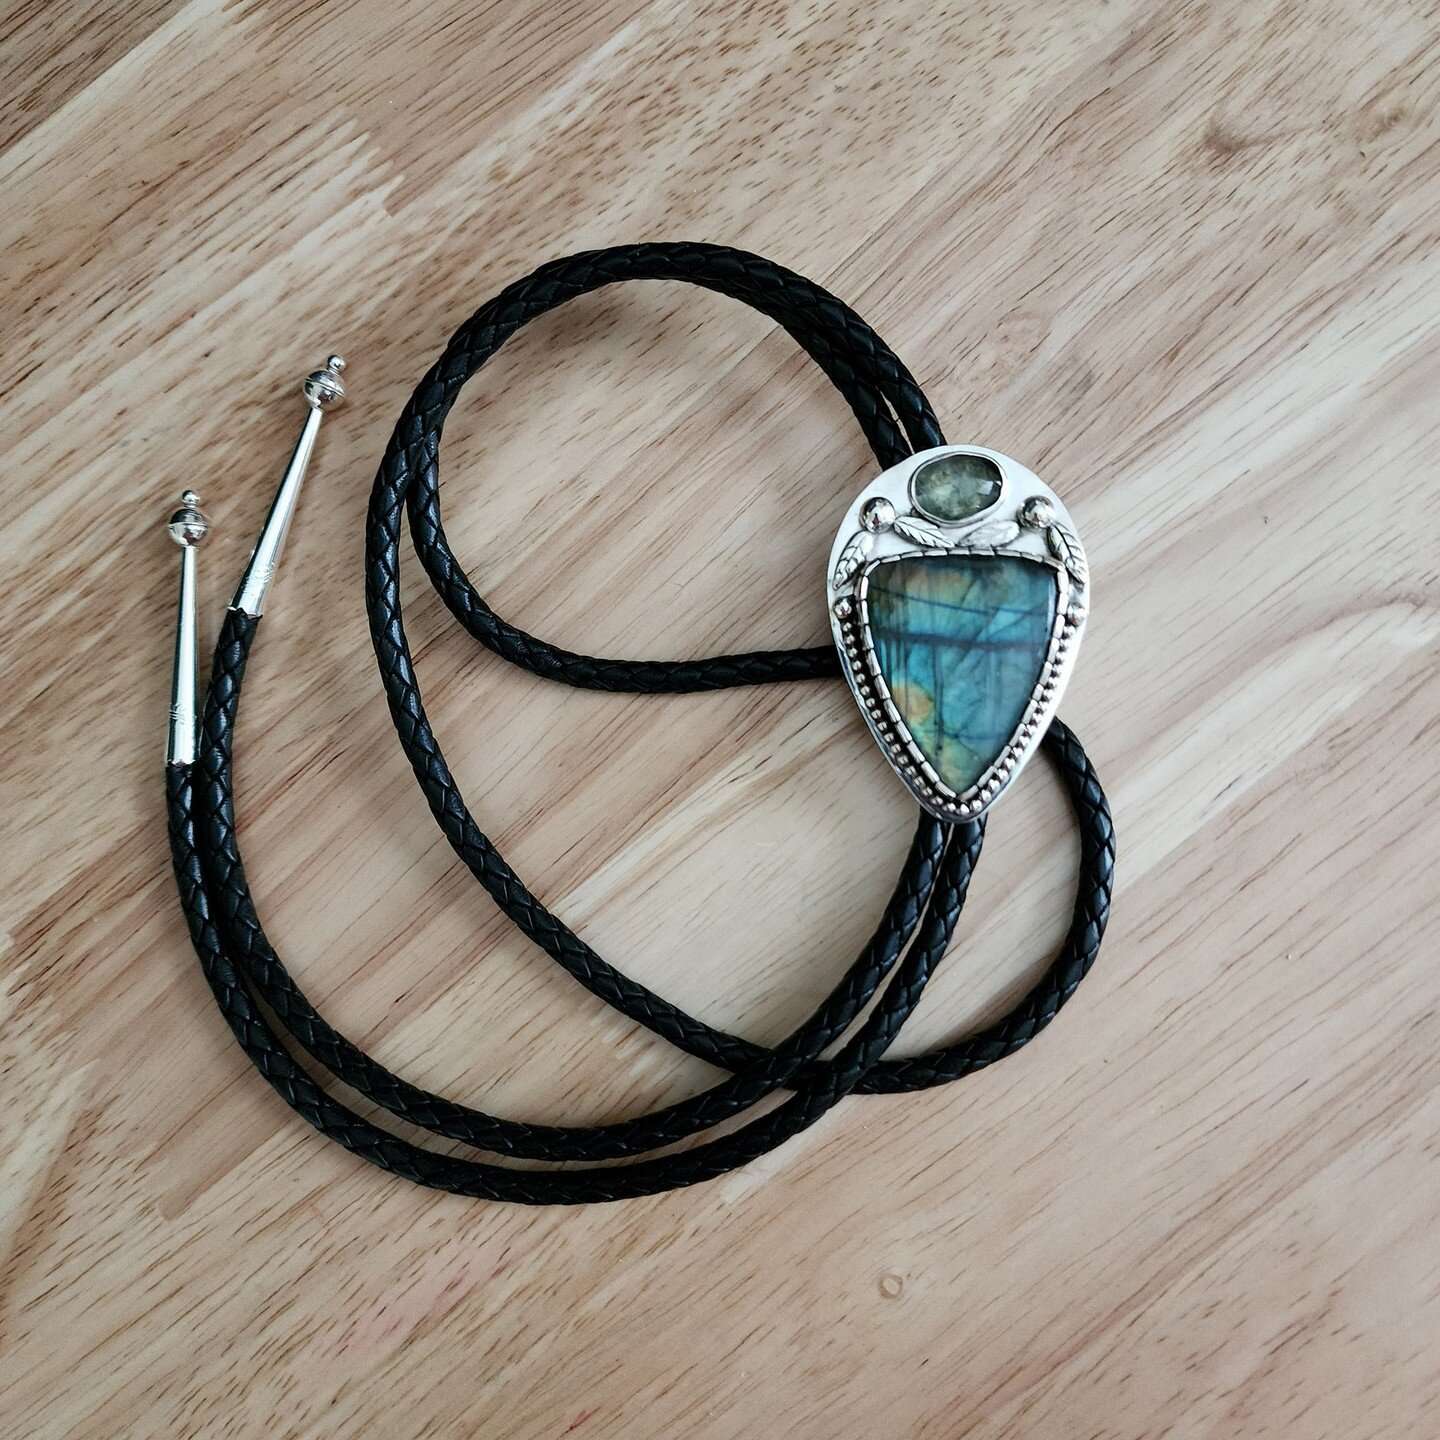 I started this gorgeous piece last year when I returned home from my east coast van trip. I had envisioned the piece even before I got the labradorite from @ransomcabs. Once I received the cab, the design came more into shape and I added the small ro